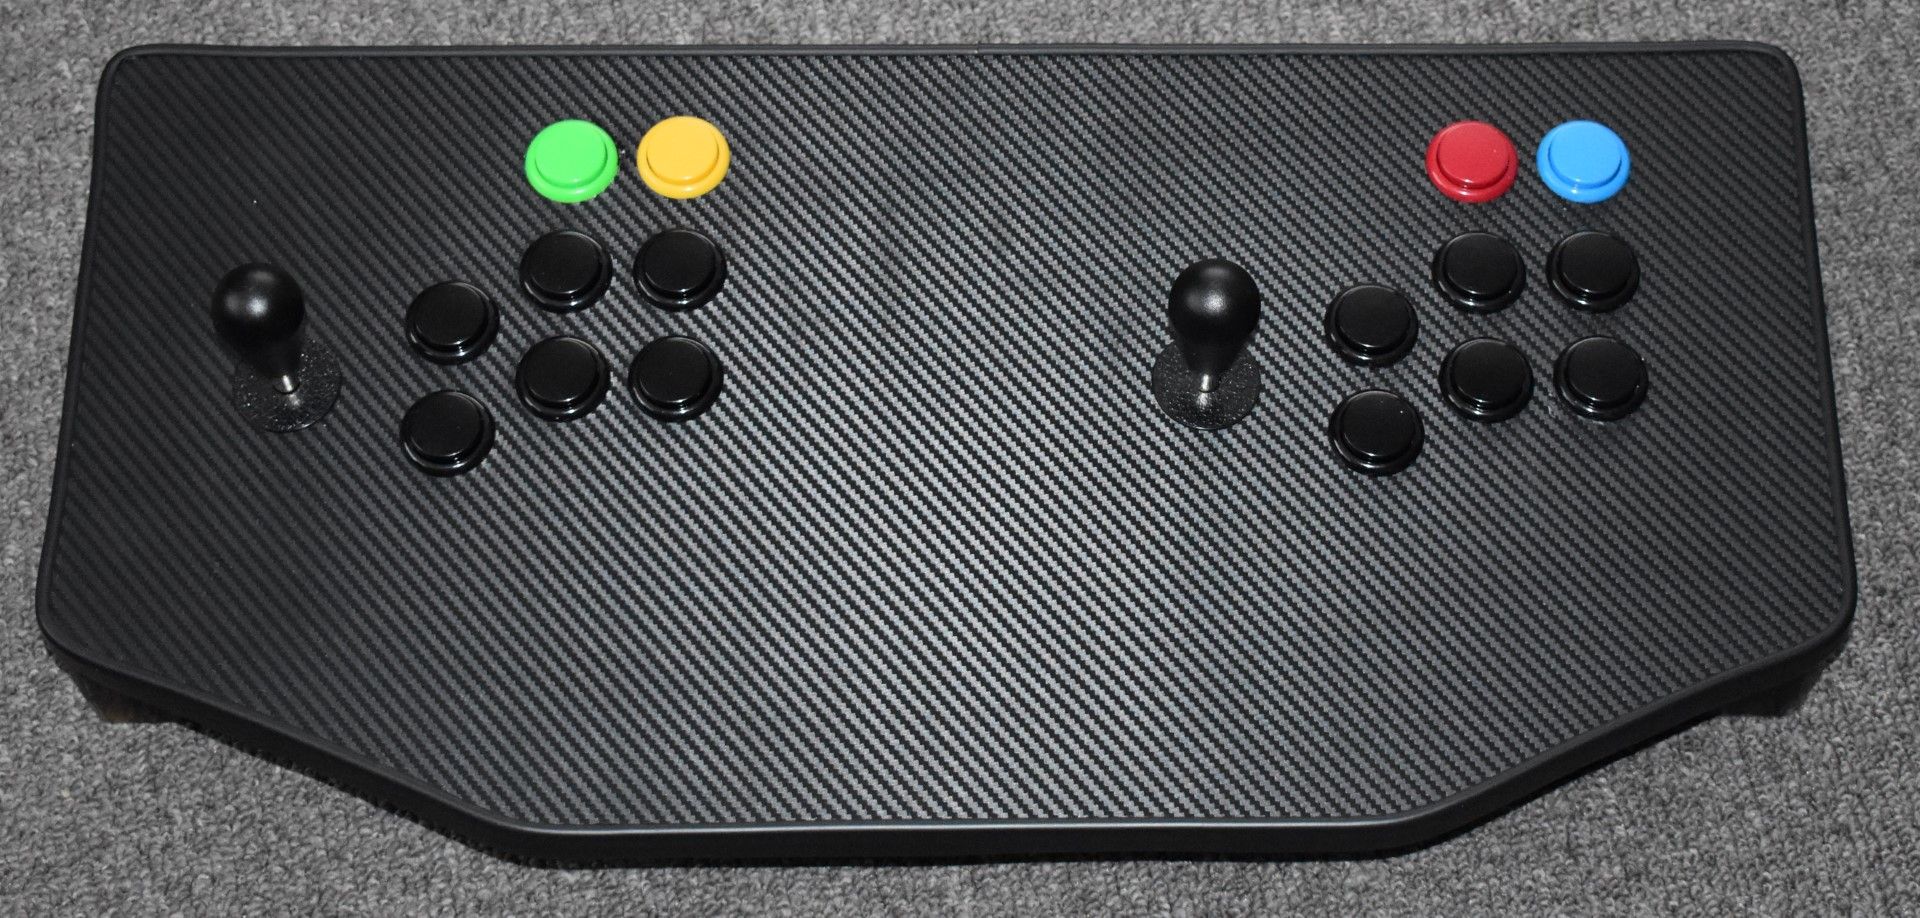 1 x Custom Two Player Arcade Control Stick - Pandoras Box With Games - NO VAT ON THE HAMMER! - Image 8 of 12